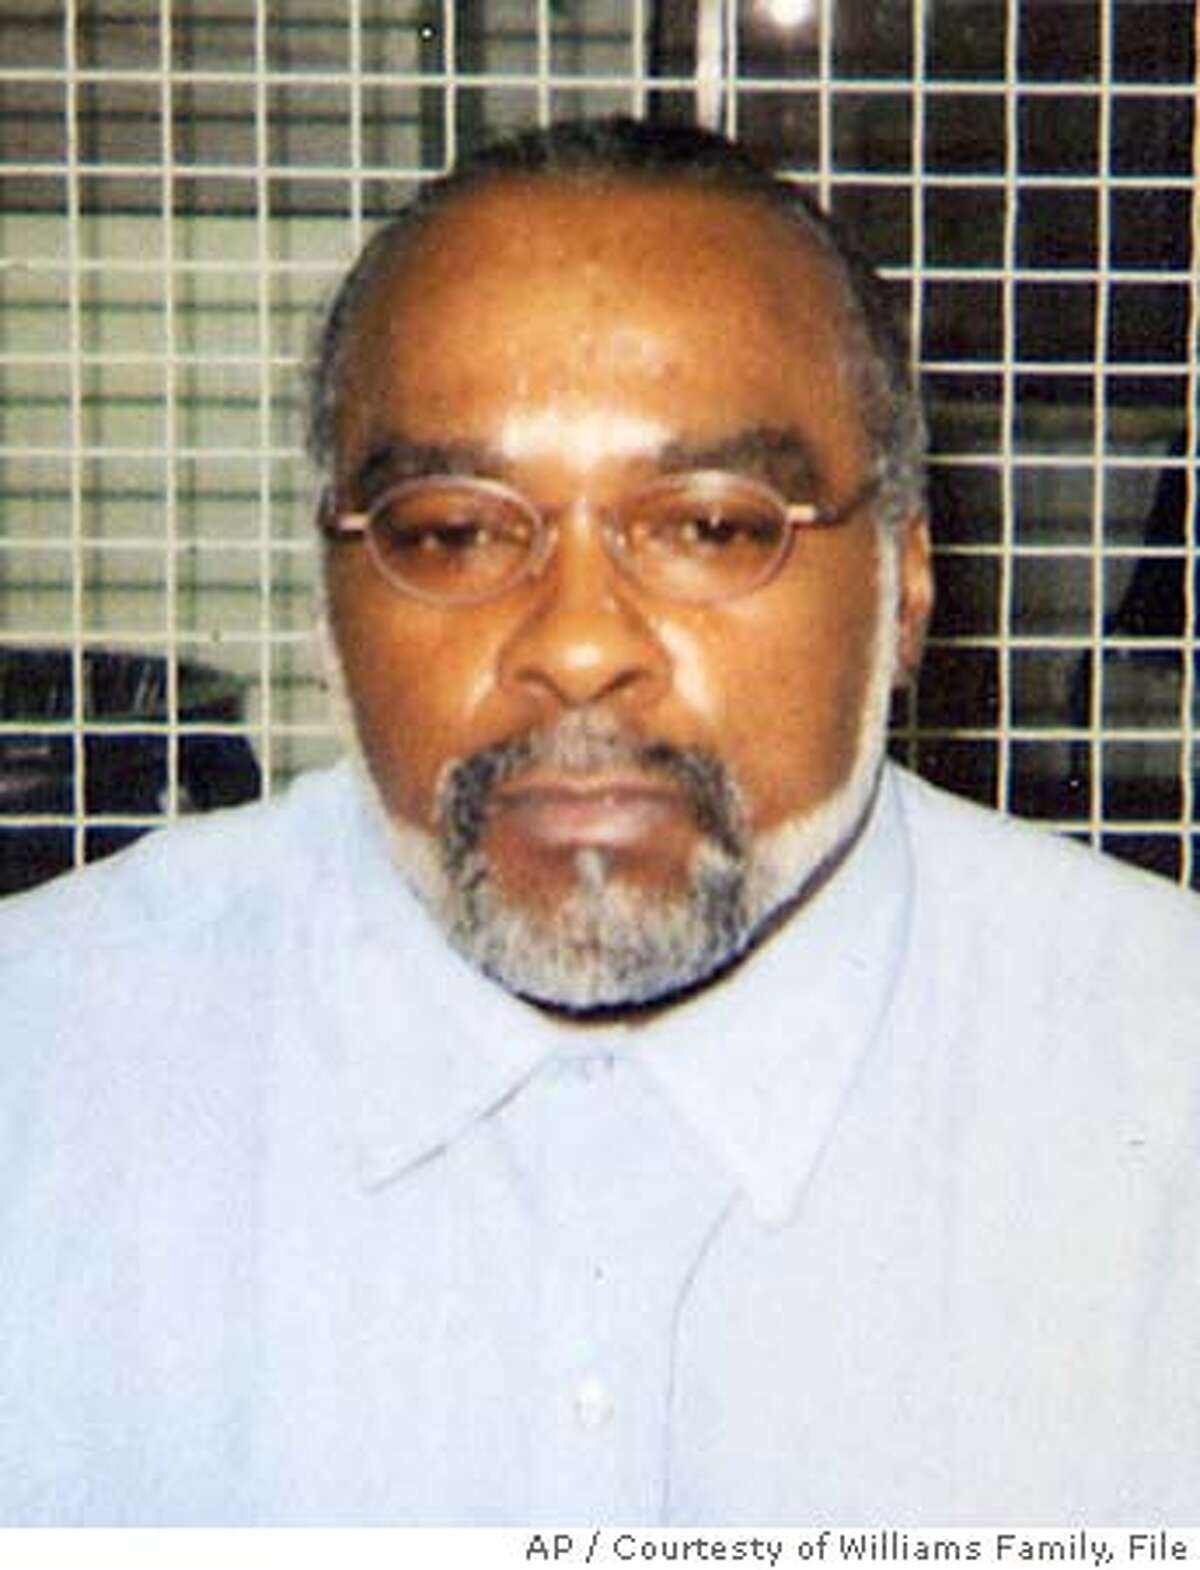 ** FILE ** In this undated photo provided by the family of Stanley Williams, Stanley "Tookie" Williams poses for a photo in the visiting area of San Quentin State Prison in California. Williams has received the President's Call to Service Award, complete with a letter from the White House signed by President Bush praising the co-founder of the notorious Crips gang for demonstrating "the outstanding character of America." Williams, 53, who started the Crips in Los Angeles in 1971 with high school buddy, Raymond Washington, was convicted in 1981 for killing four people. He's been on death row at San Quentin State Prison for two dozen years. (AP Photo/Courtesty of Williams Family, File)